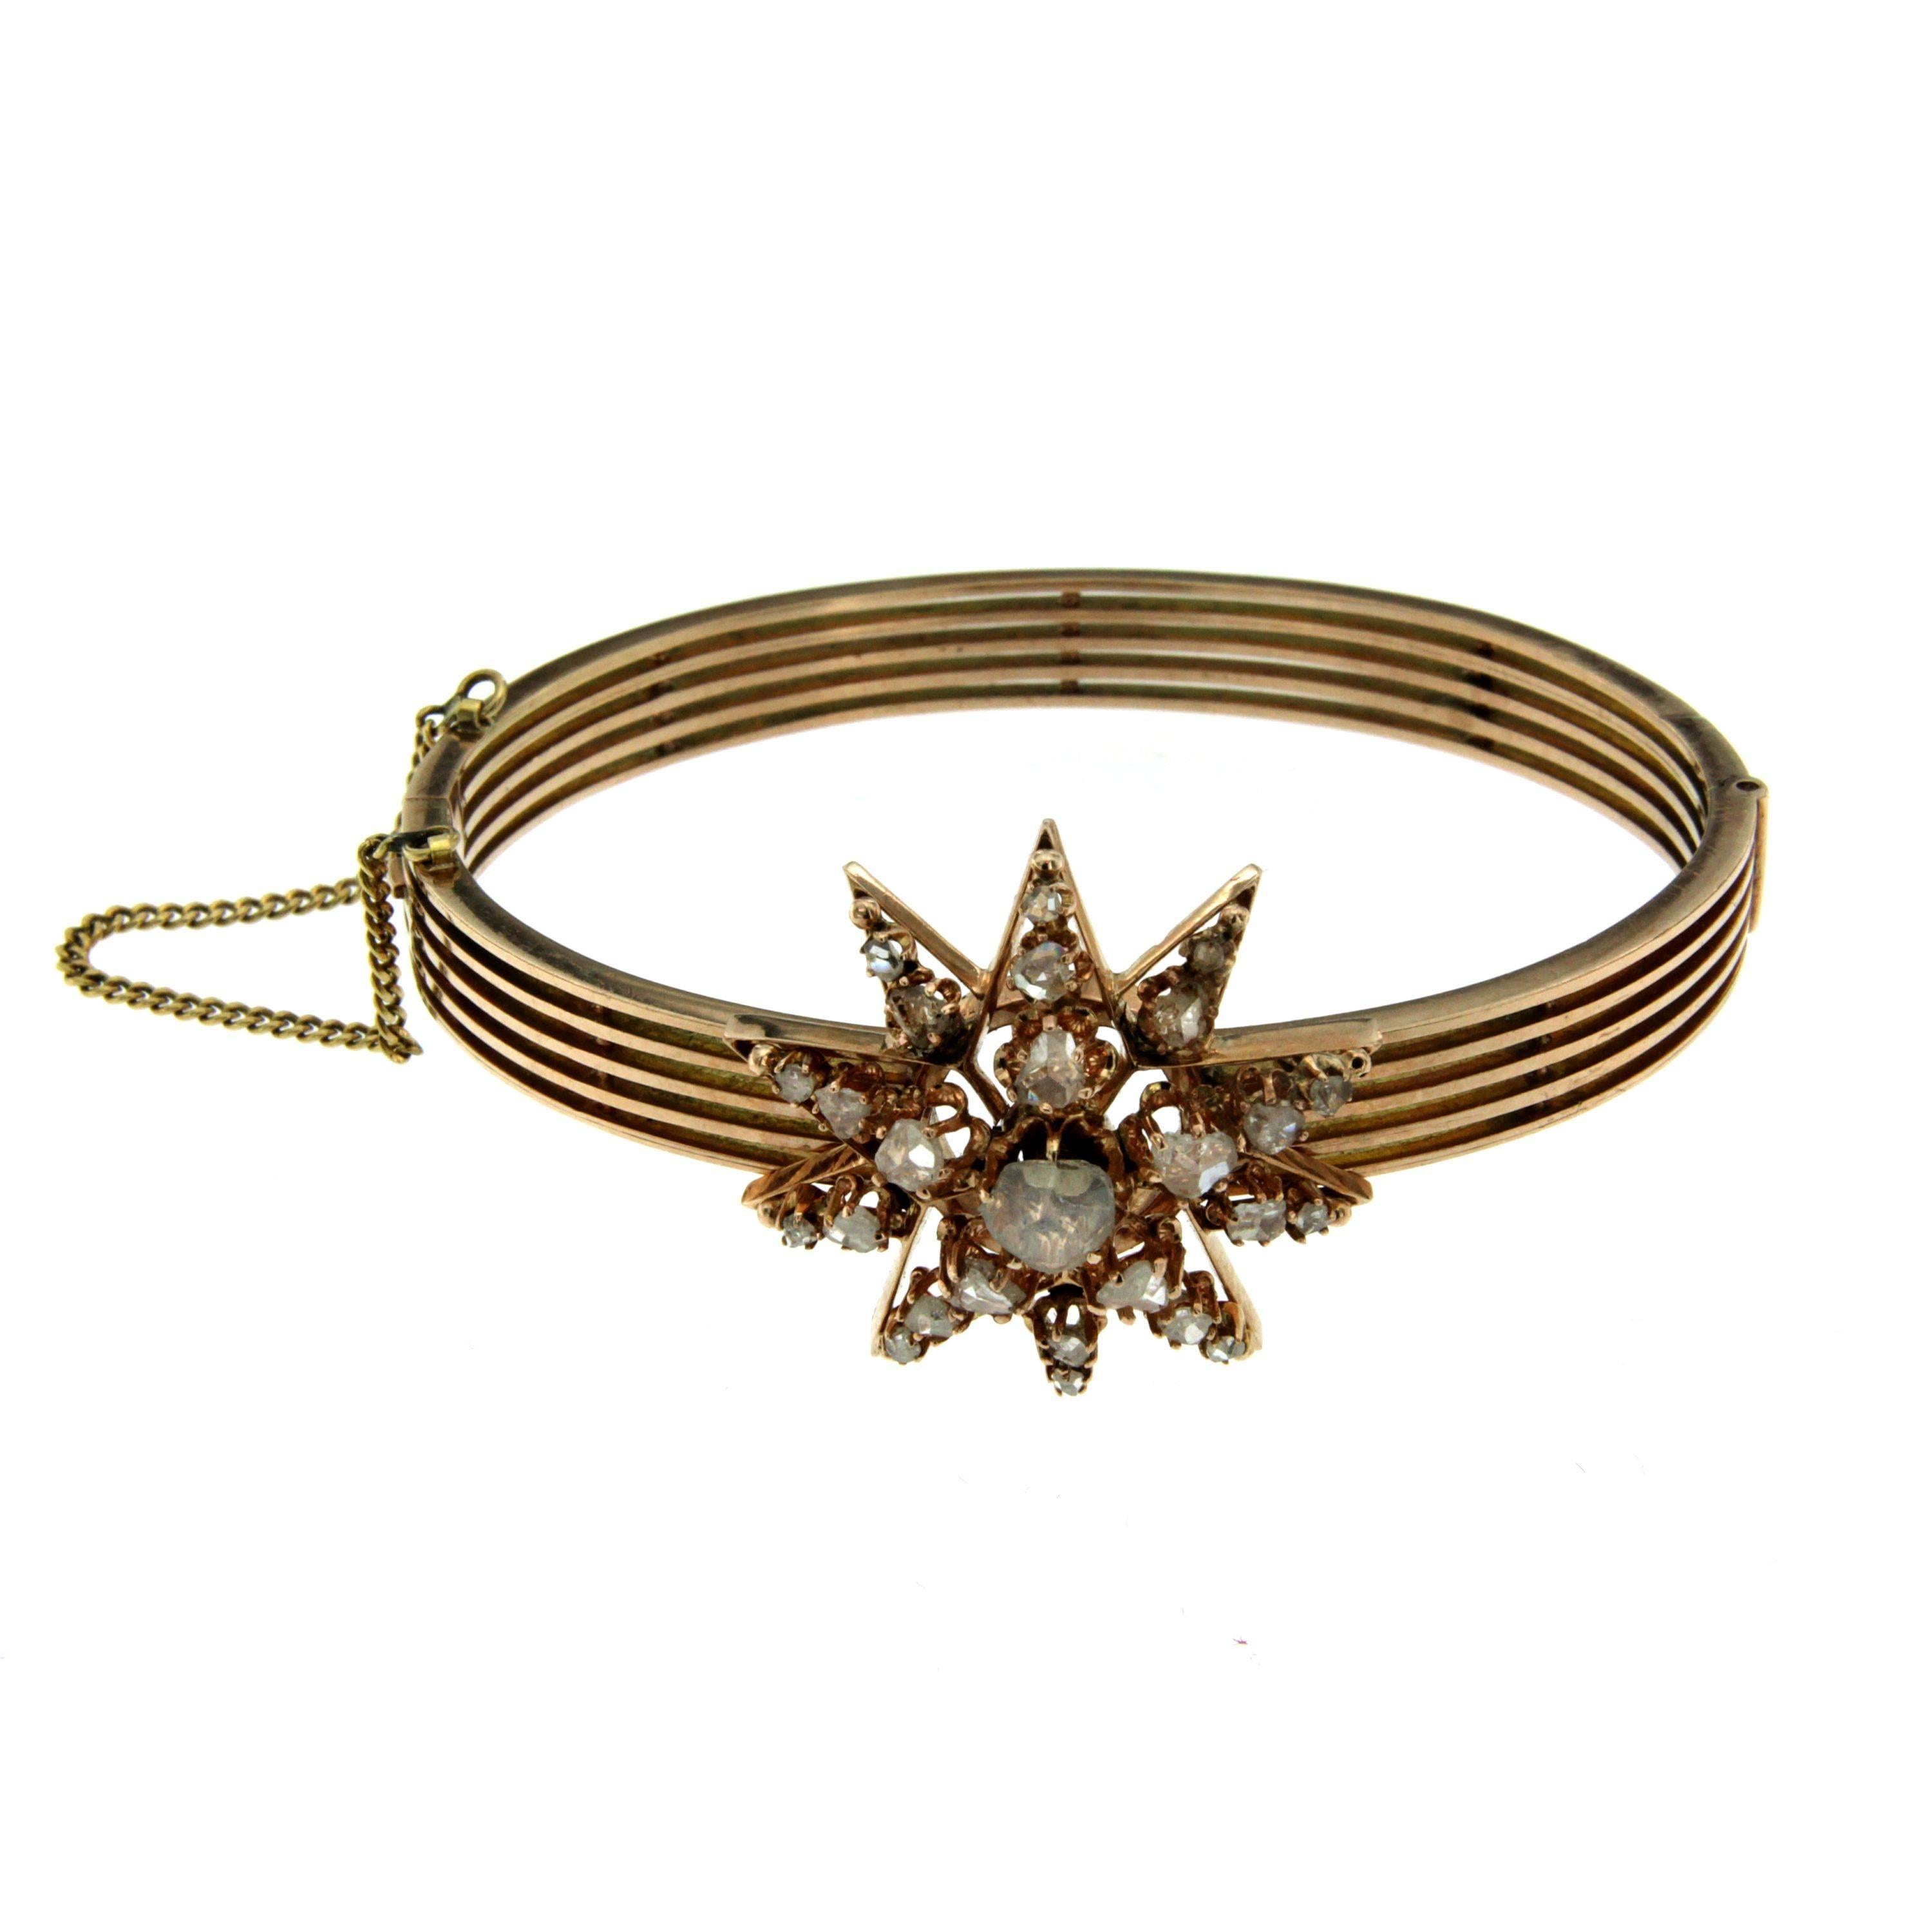 A gorgeous Victorian star design bracelet, set with table-cut diamonds mounted in 12k rose Gold. All handcrafted, Circa 1880

Estimated total diamond weight 1.30 cts

Dimensions: 
Bracelet Diameter: 5,7 cm (22.44 in)

CONDITION: Pre-owned -